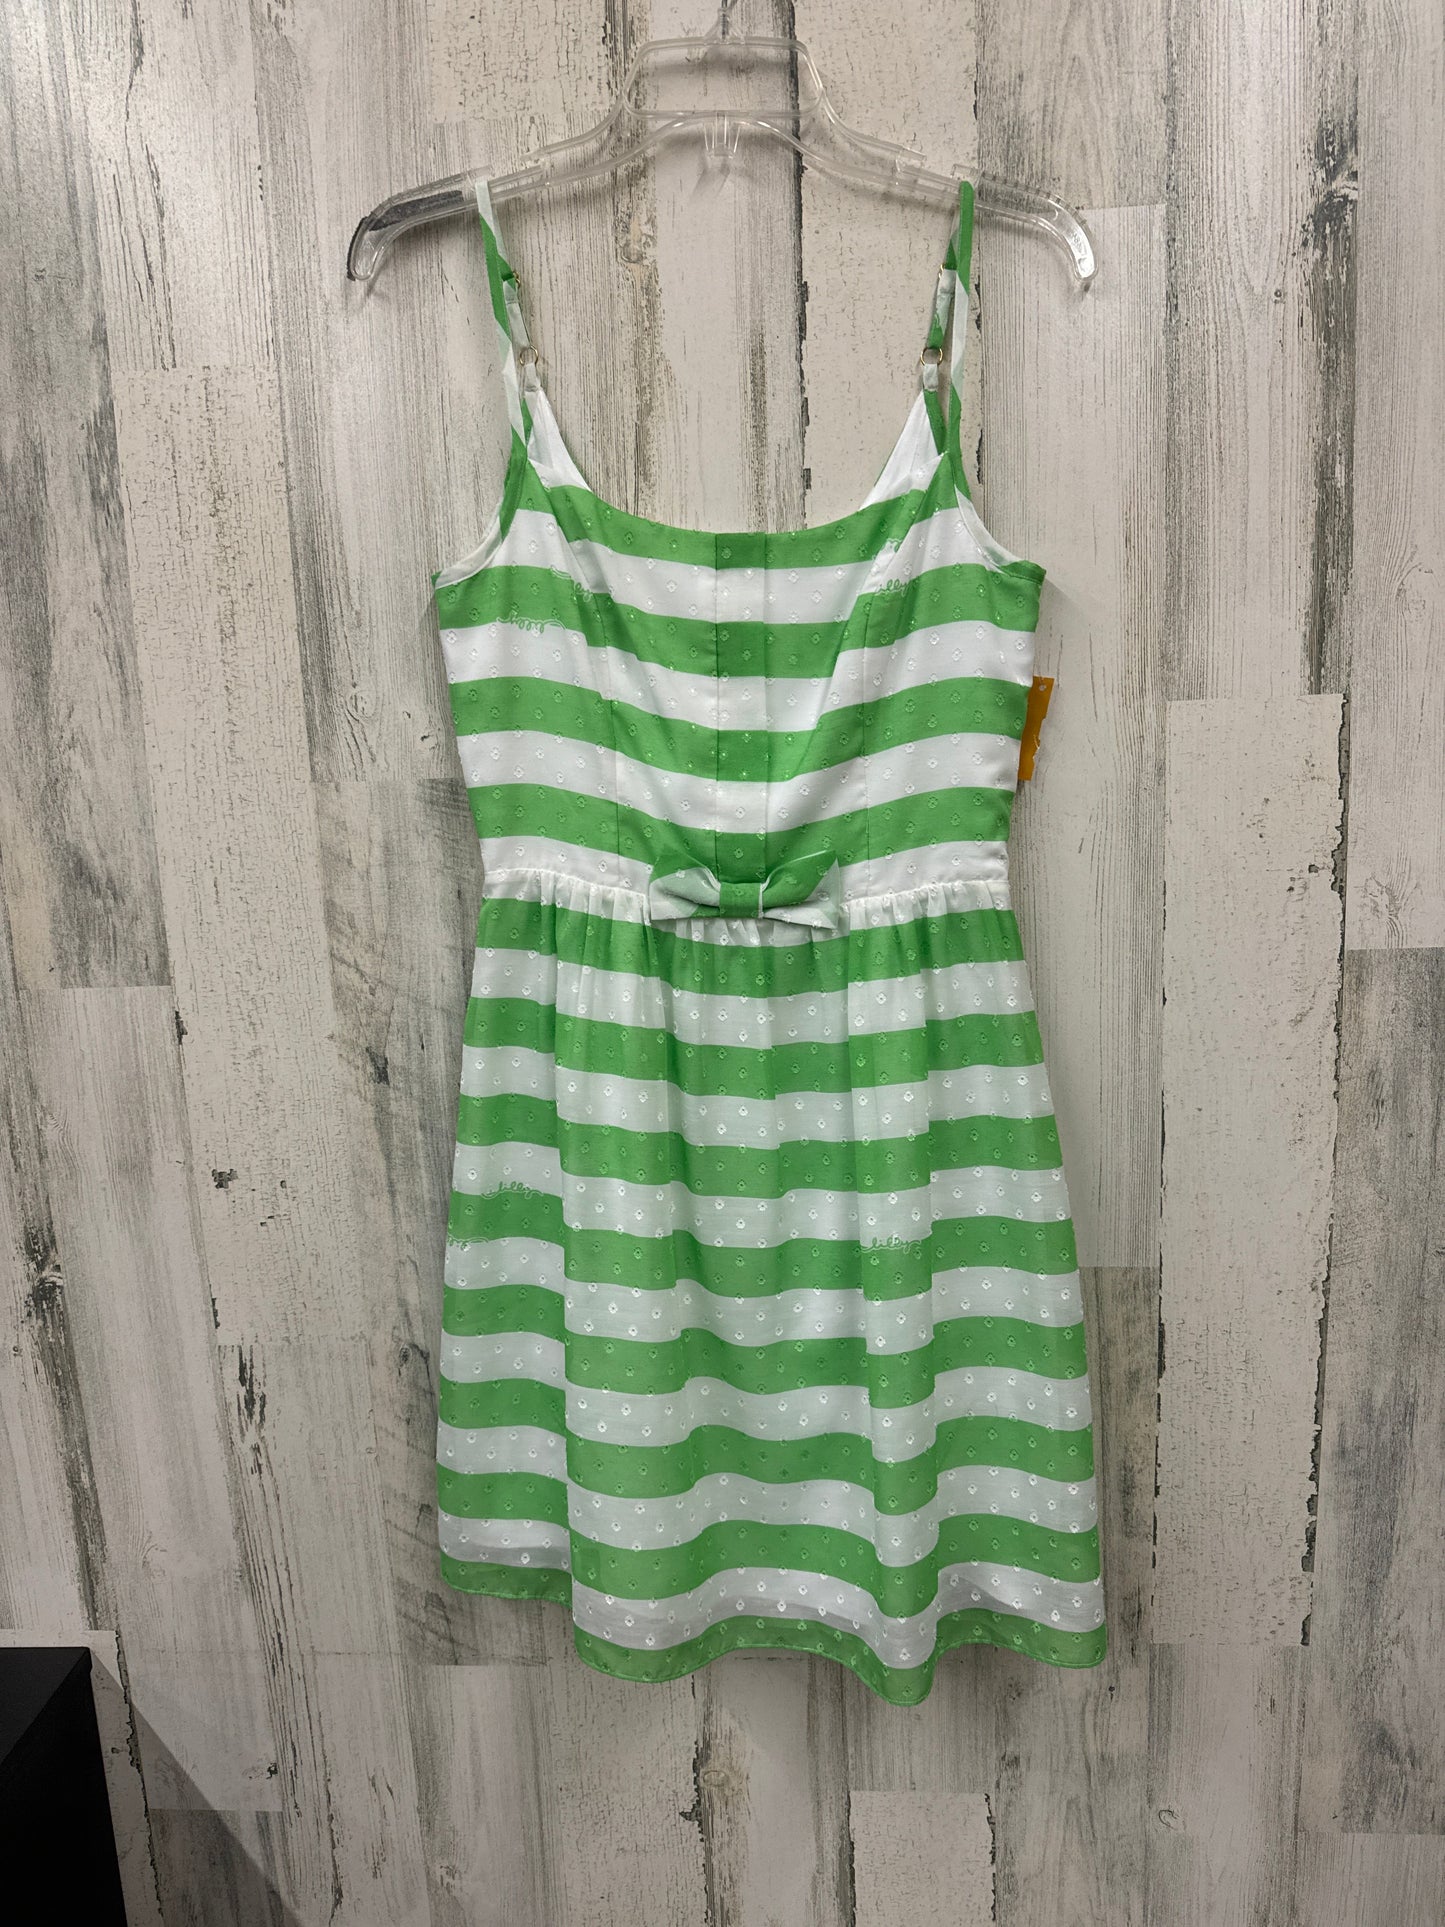 Romper By Lilly Pulitzer  Size: 0